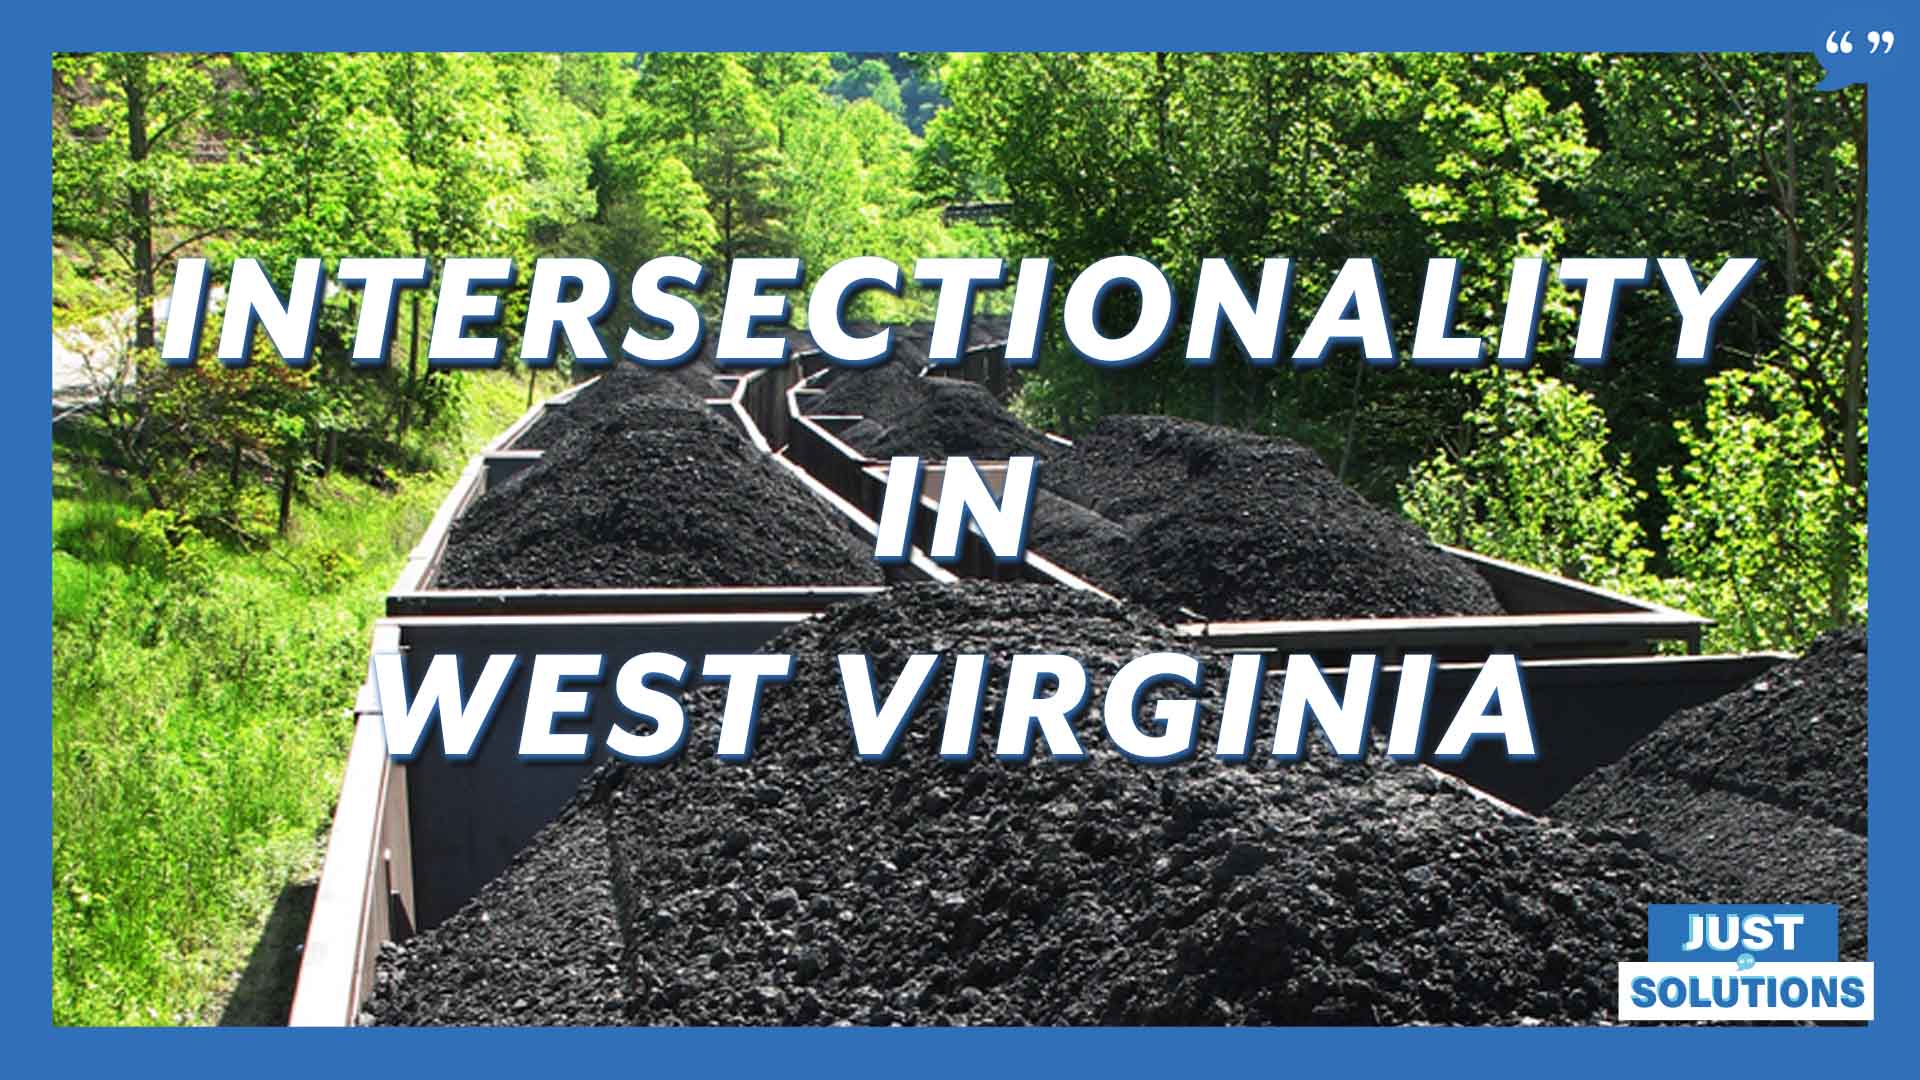 Intersectionality with Activists in West Virginia